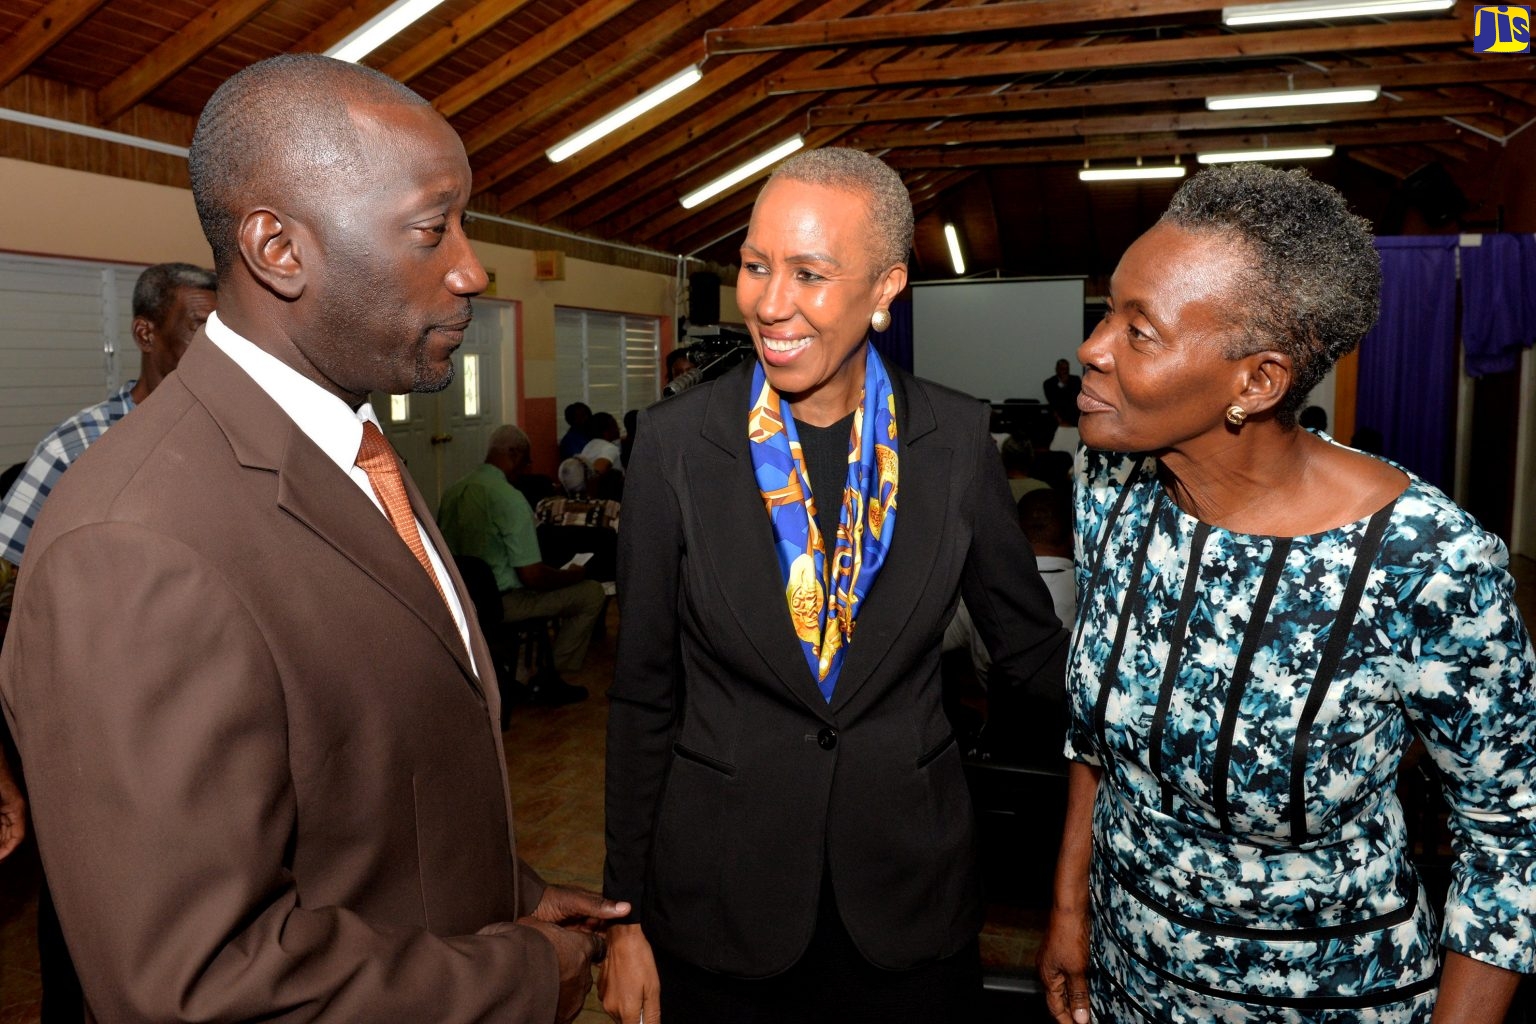 Minister of Science, Energy and Technology, Hon. Fayval Williams (centre) and member of the National Consumers League of Jamaica (NCLJ) and retired Executive Chef, Mazie Miller (right), listen to Vice President of the NCLJ, Michael Diamond, at a public forum put on by the NCLJ in observance of World Consumer Rights Day 2019, to be celebrated on March 15 under the theme ‘Trusted Smart Products’. The forum was held on Wednesday (March 13) at the Bureau of Standards Jamaica (BSJ), in Kingston.